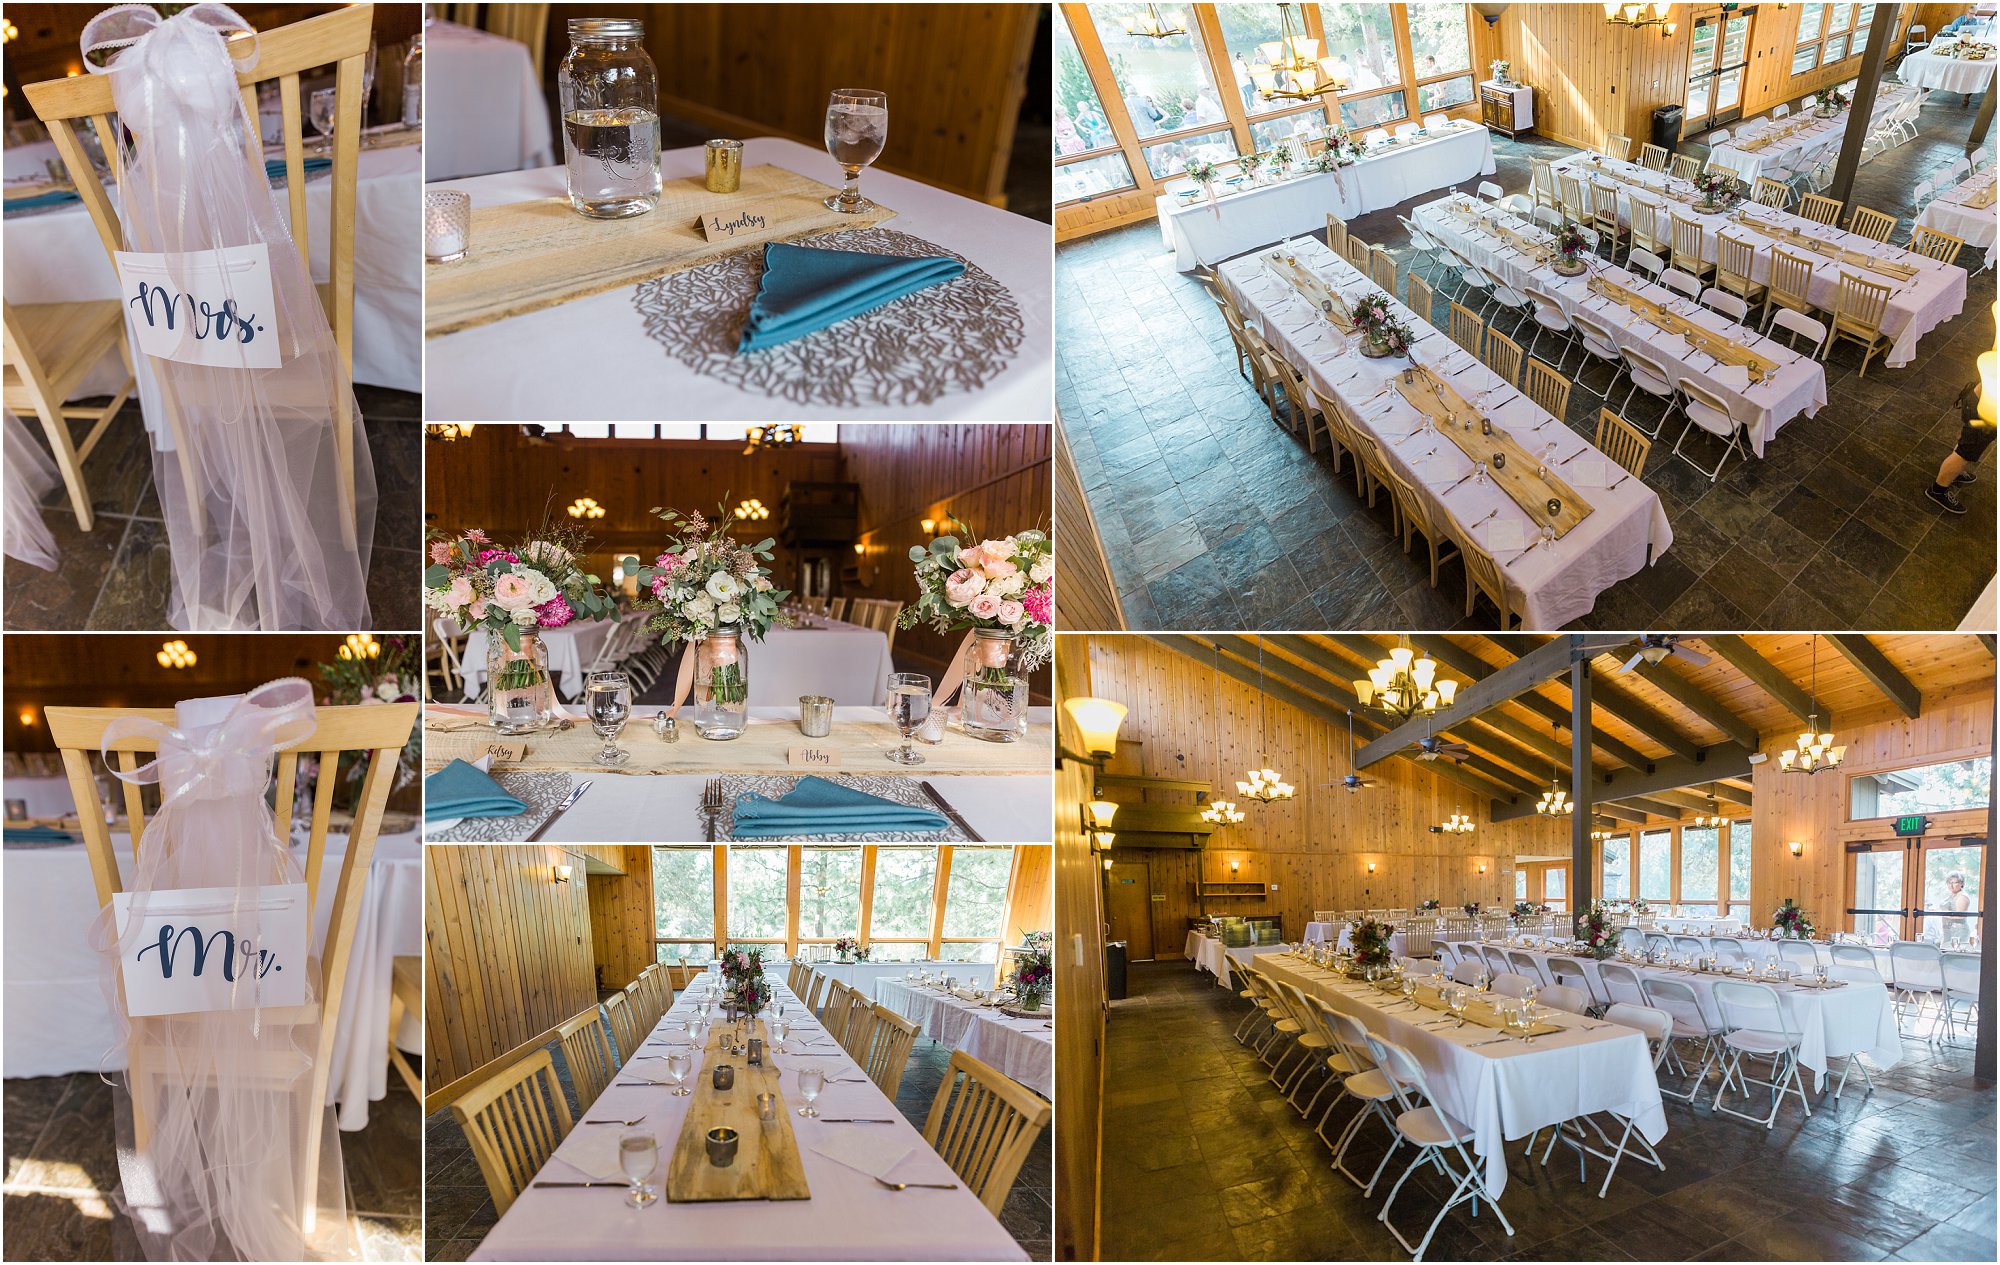 The rustic wooden interior of Bend, Oregon's Rock Springs Ranch wedding venue set up for indoor dining. | Erica Swantek Photography